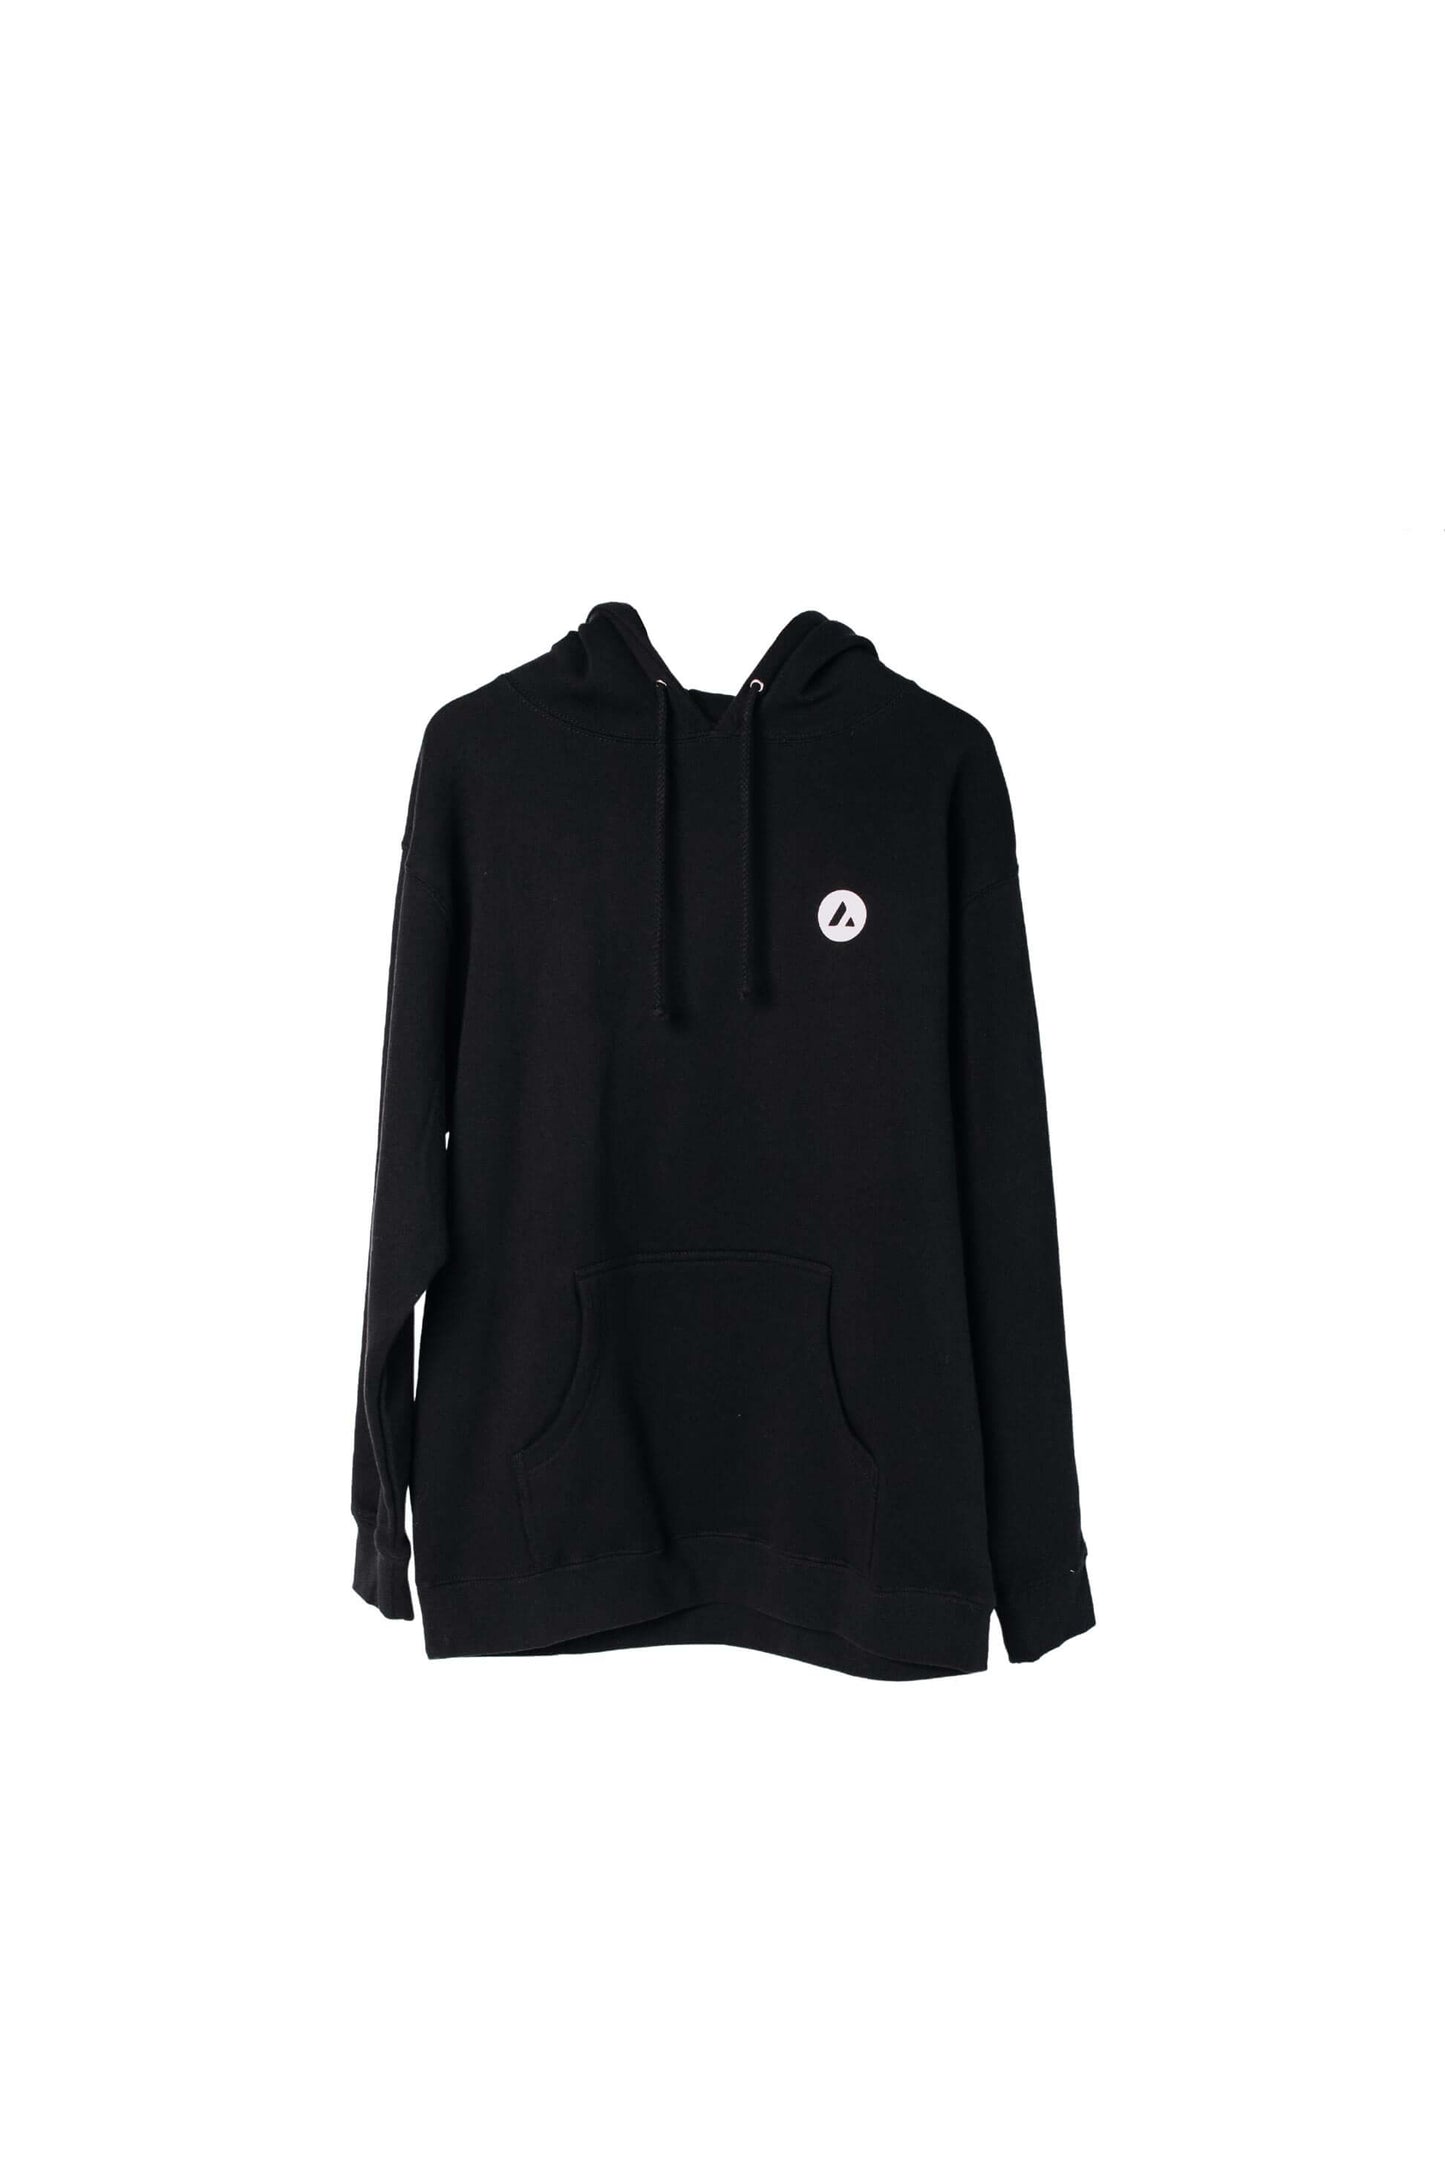 Avalanche Ad Astra Black Hoodie front view